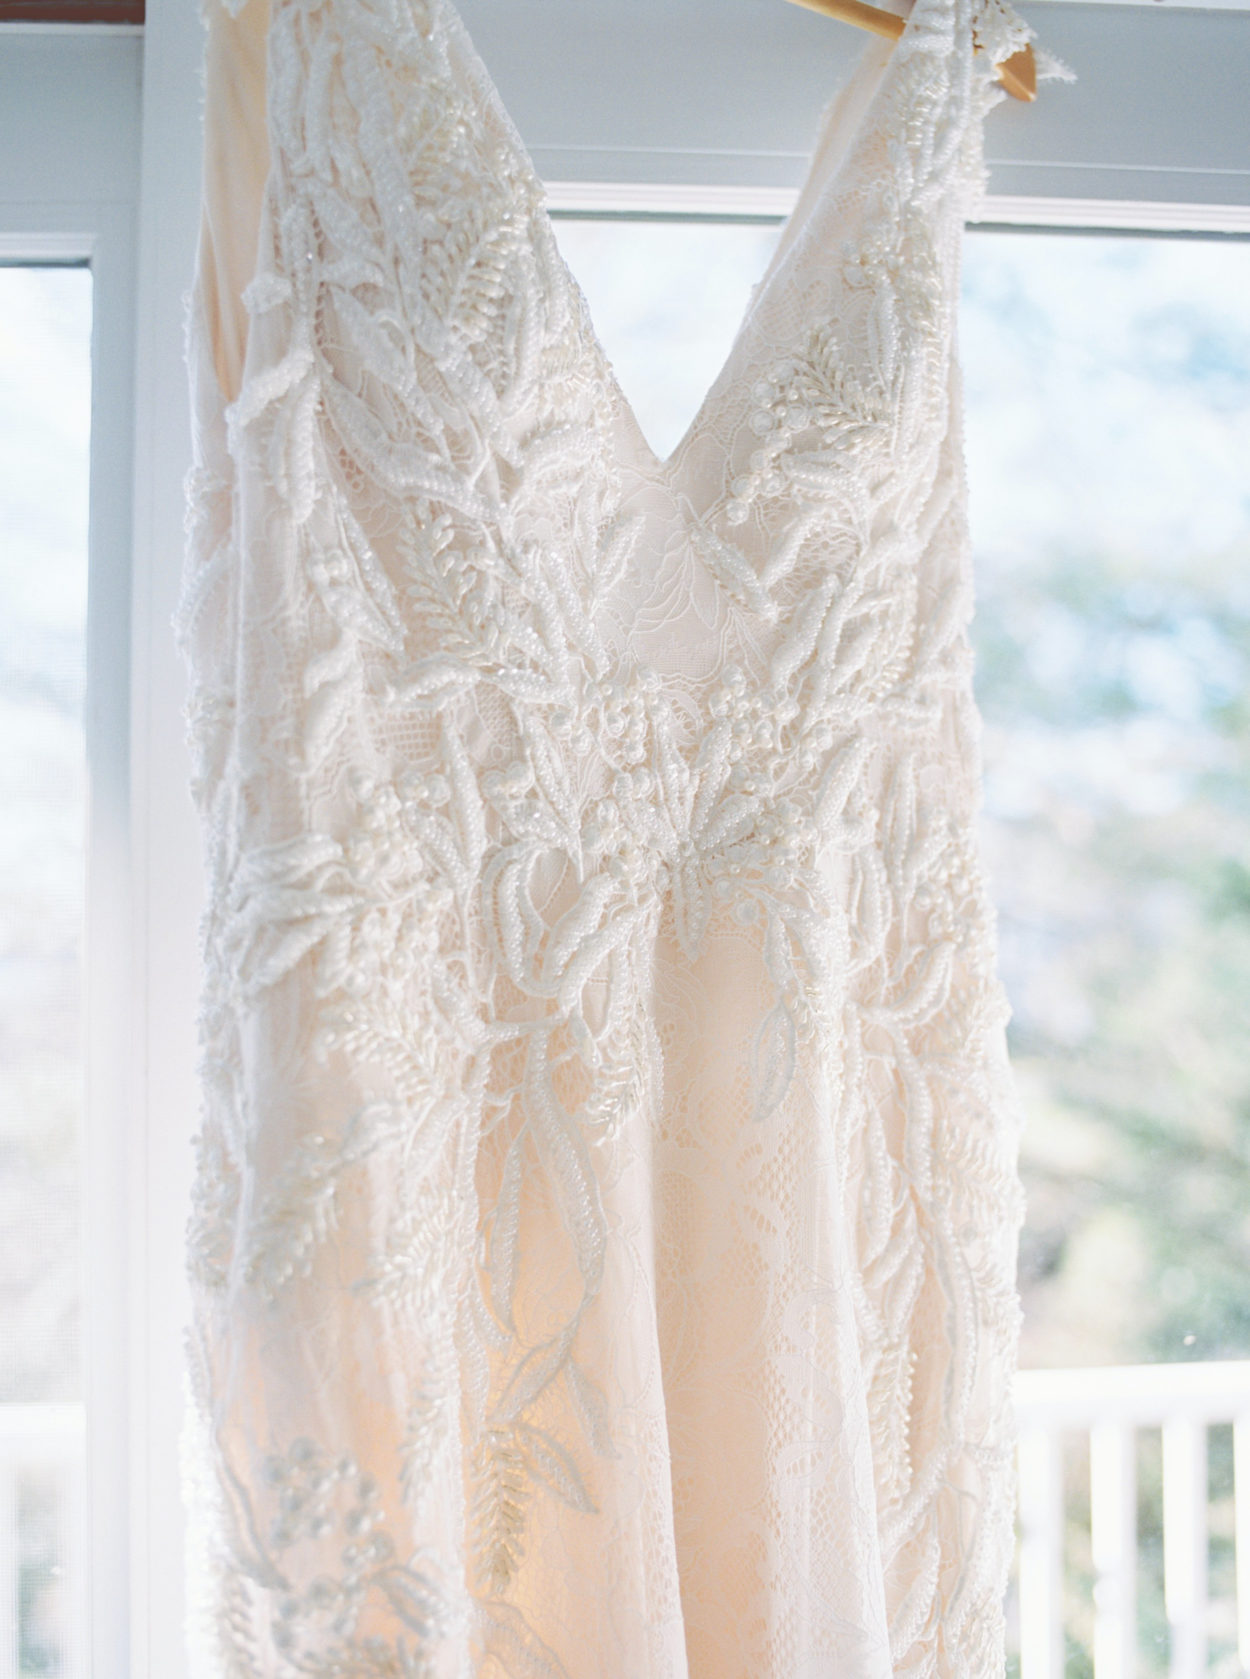 Beaded wedding gown by Justin Alexander